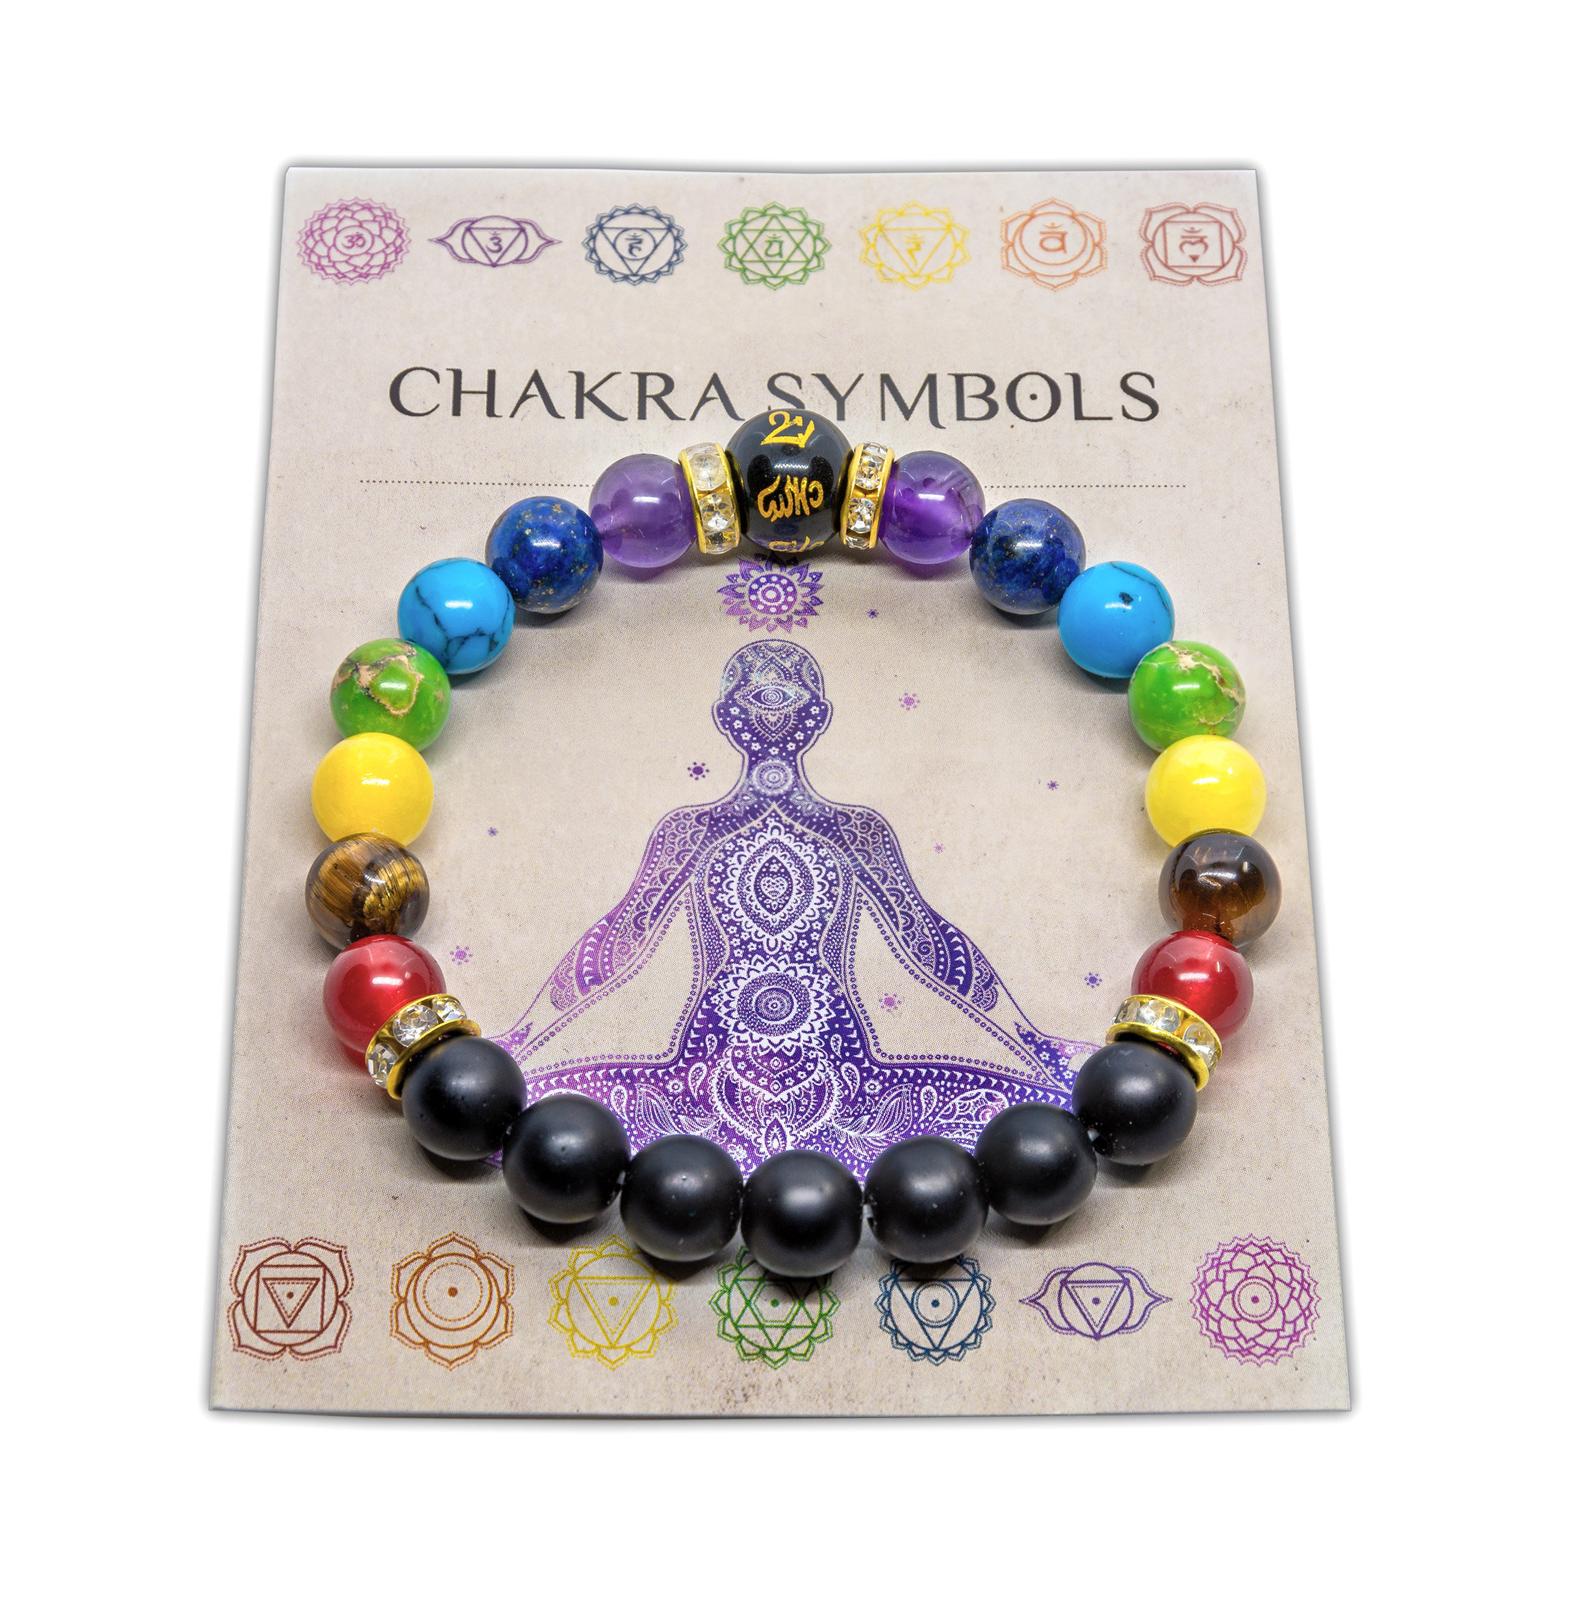 What are Chakras? And how chakra system is connected with your body energy